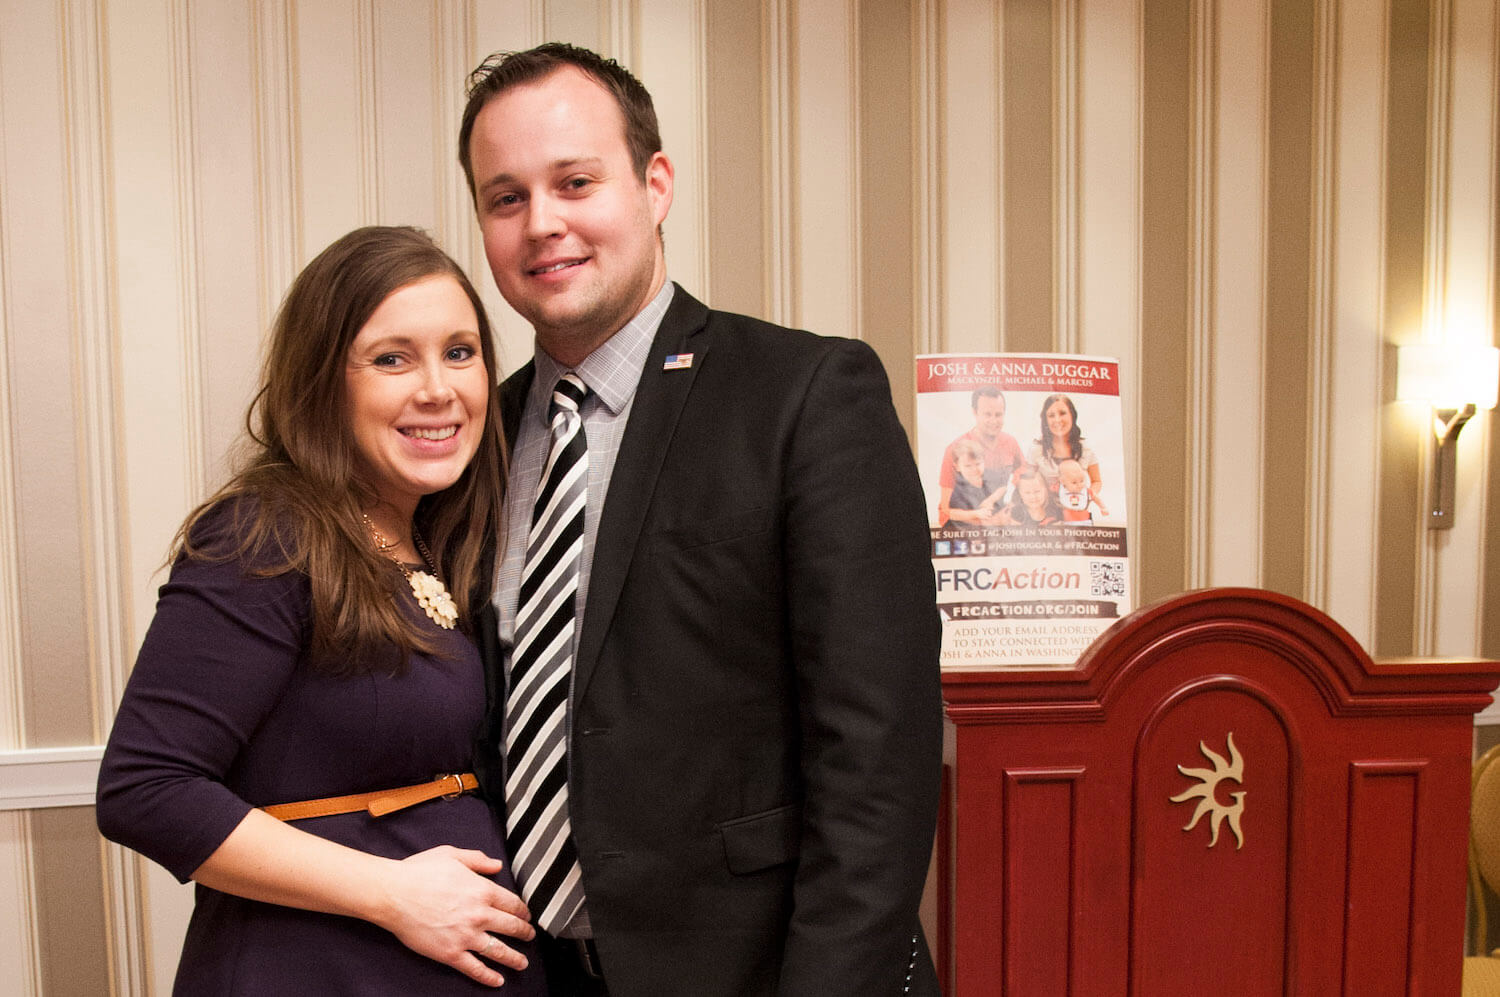 Josh and Anna Duggar embracing at a political event. Anna Duggar is pregnant and cradling her belly.